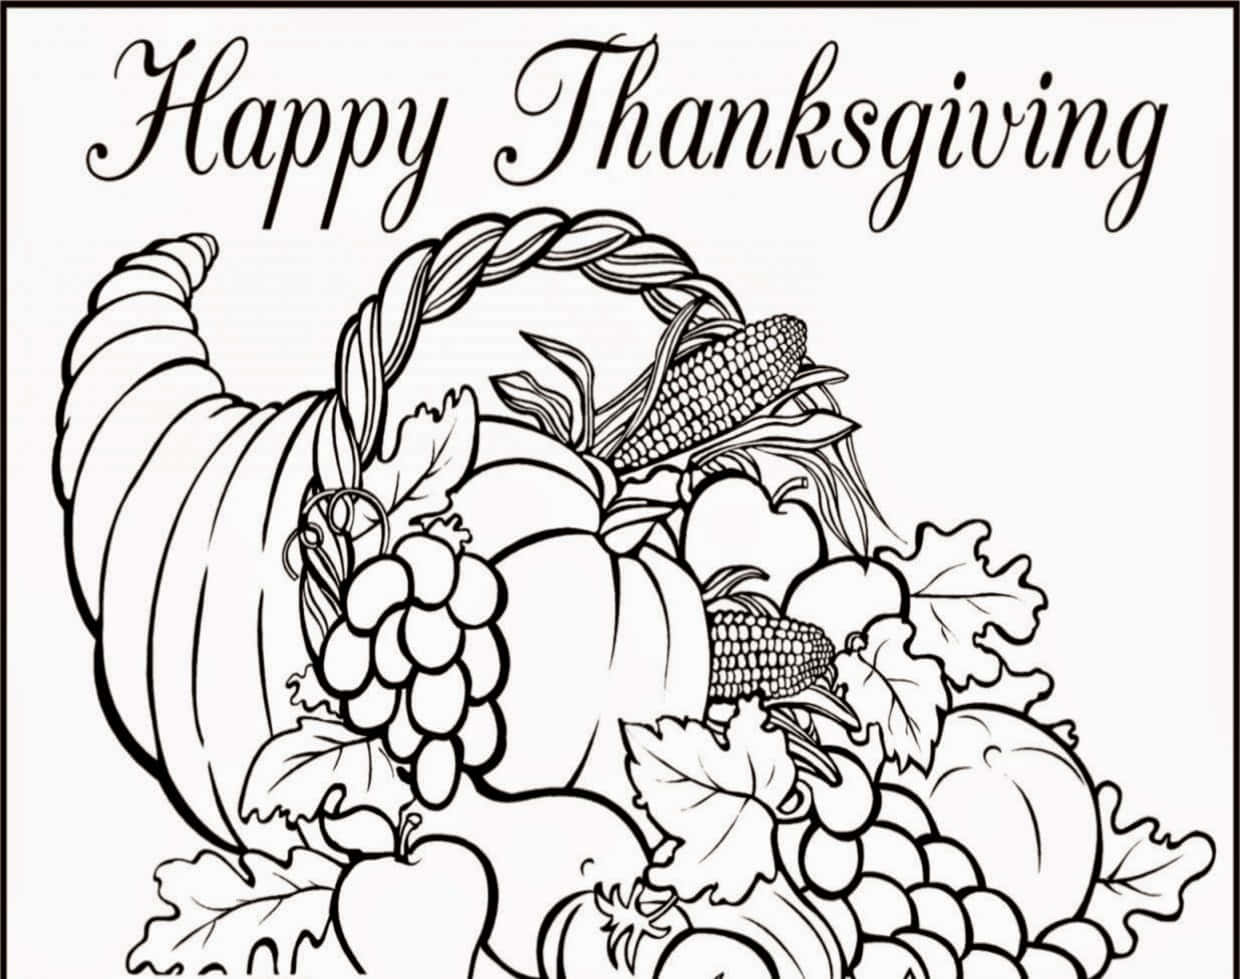 Colorful Thanksgiving themed coloring for children